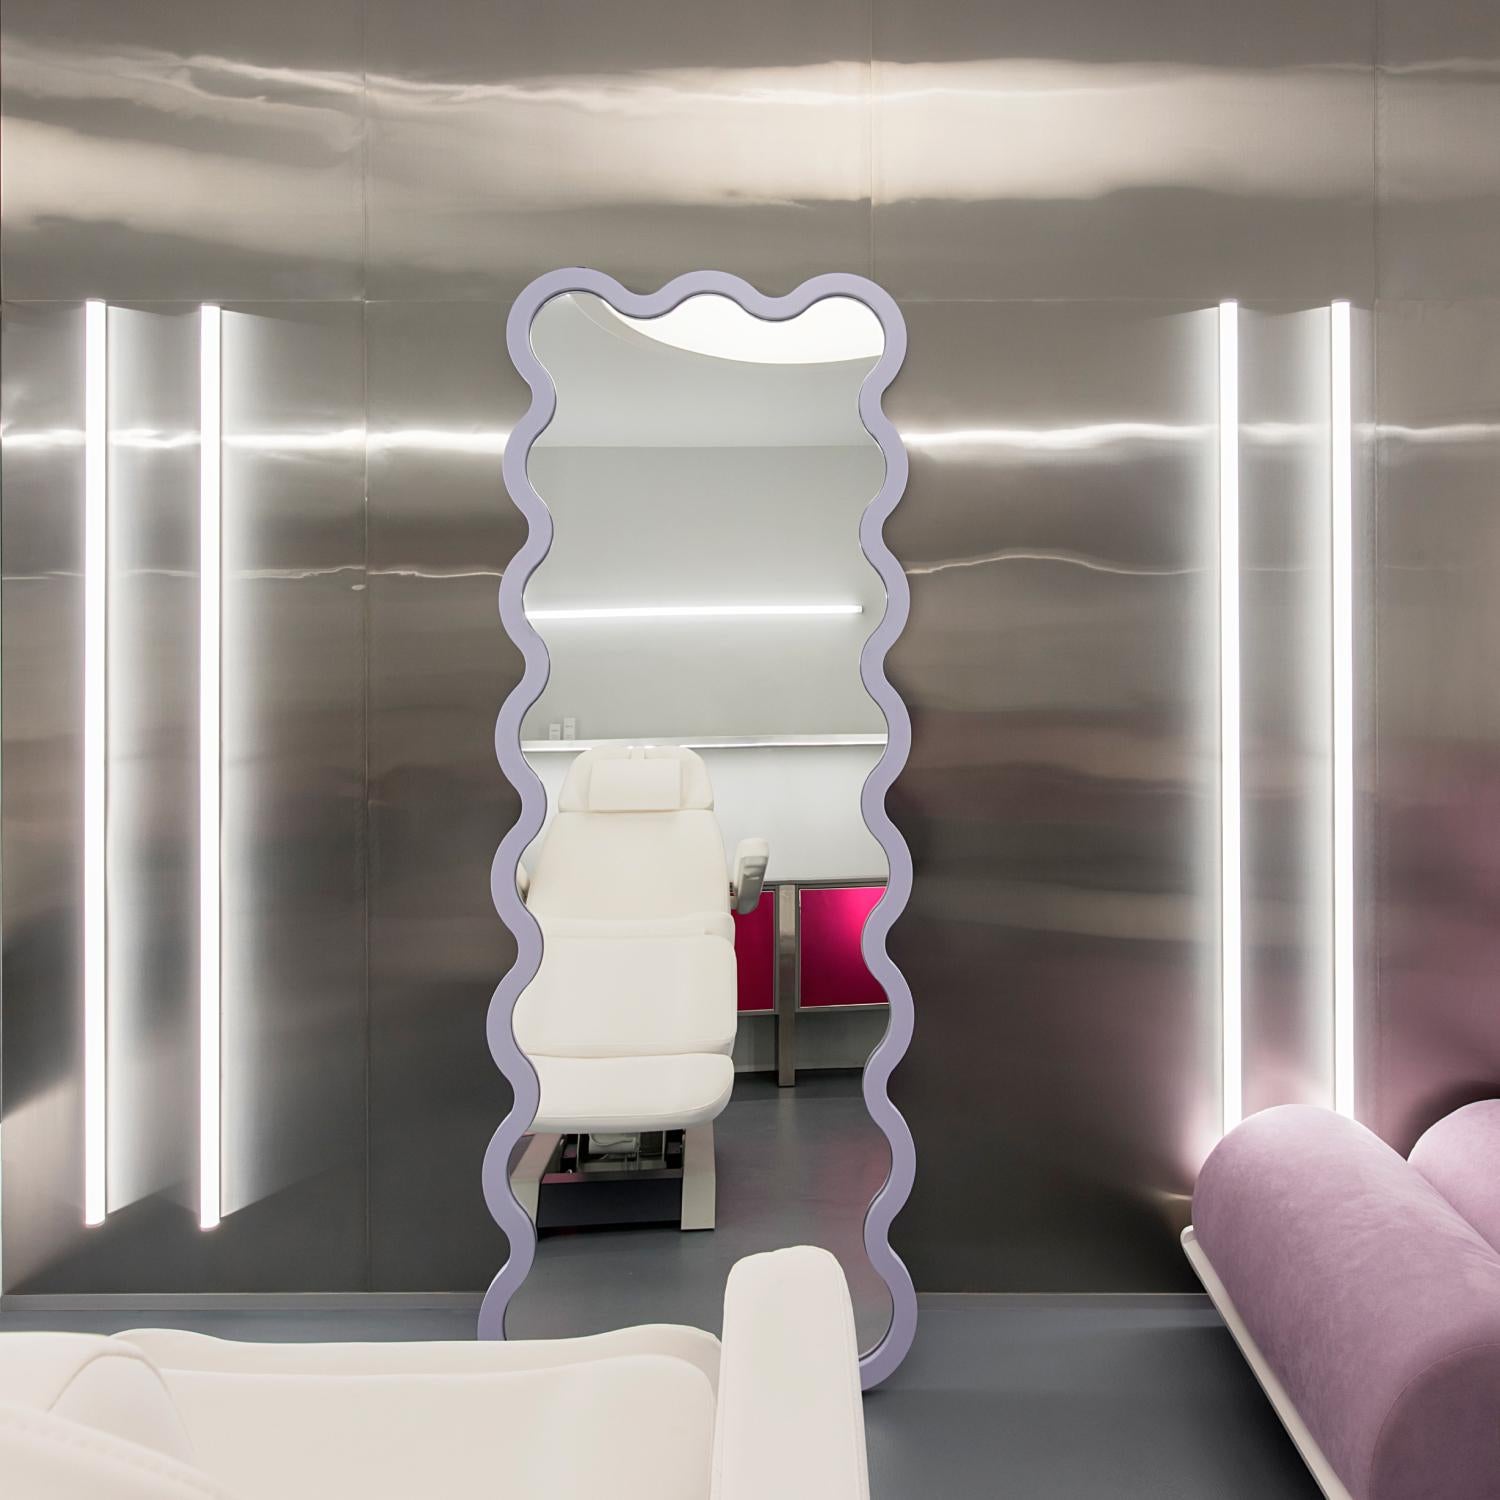 HVYLI mirror
Melted, delicate forms have become a new world trend. With the help of modern high-tech productions, we can make our reality more complex and interesting.  

Our collection of HVYLI mirrors will always be a beautiful accent in any